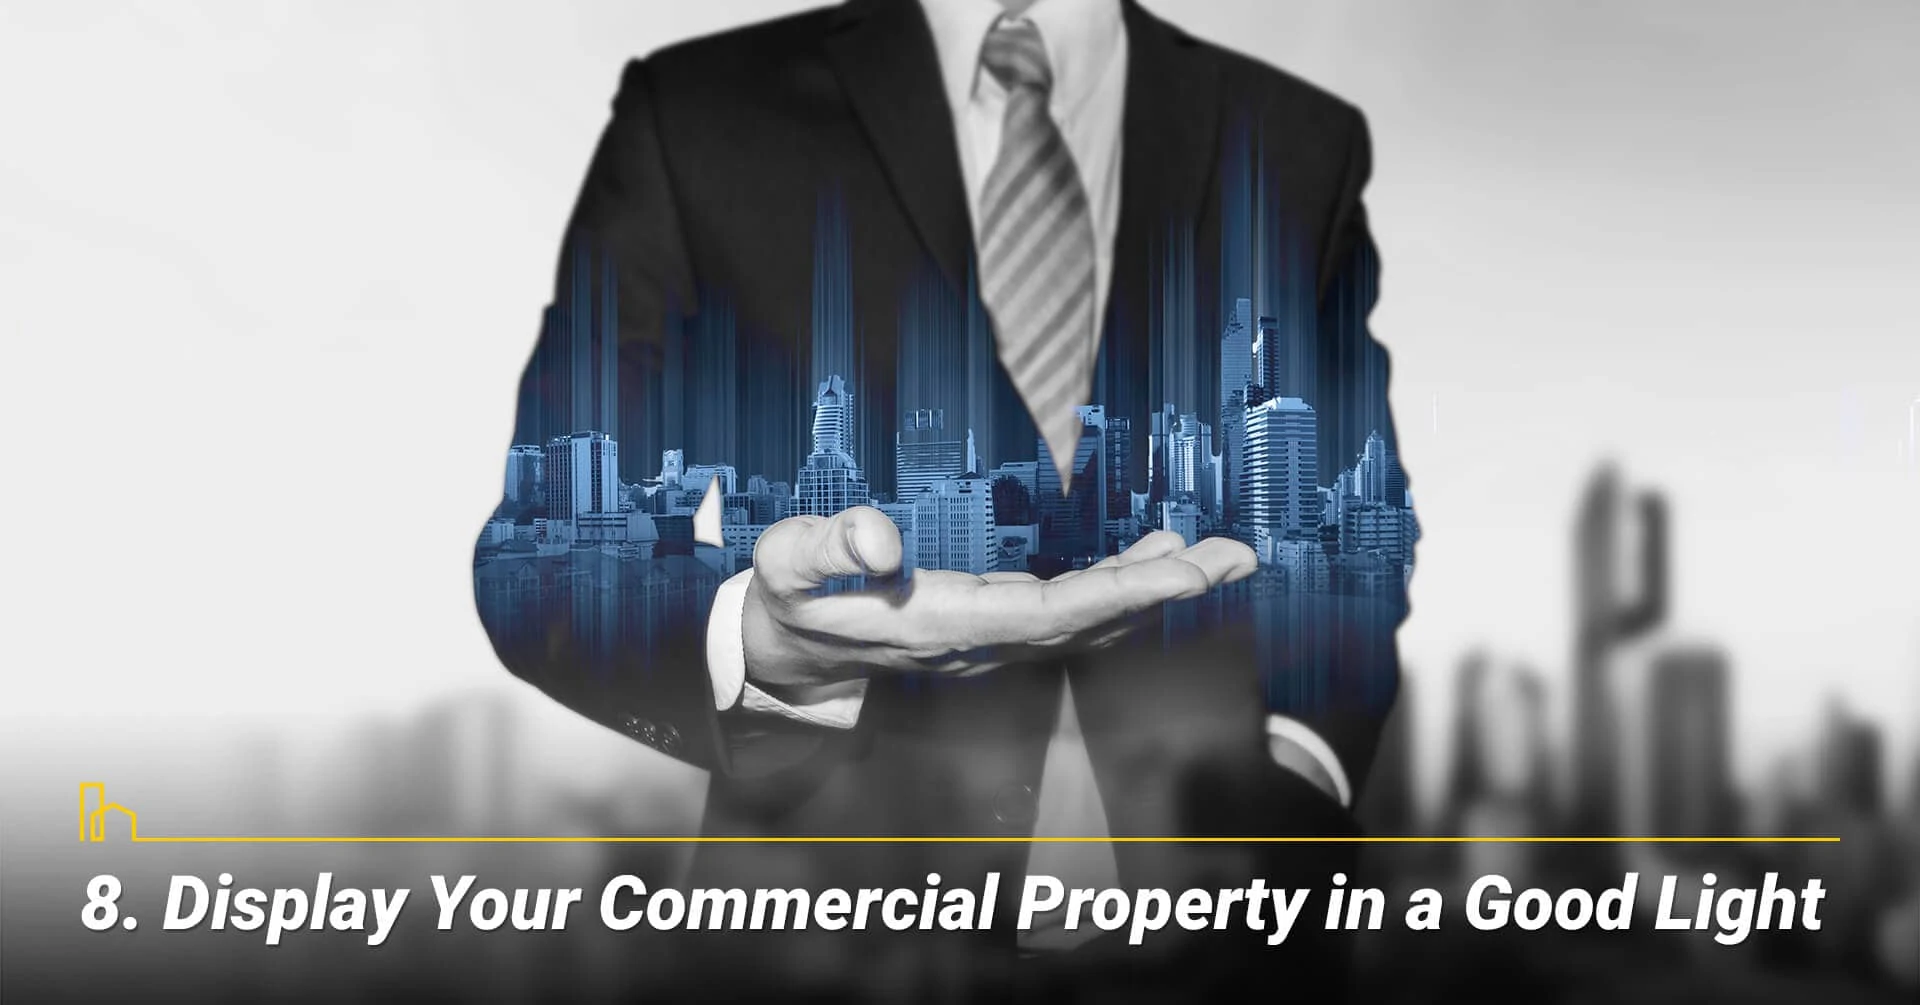 Display Your Commercial Property in a Good Light, bring your property's best images forward